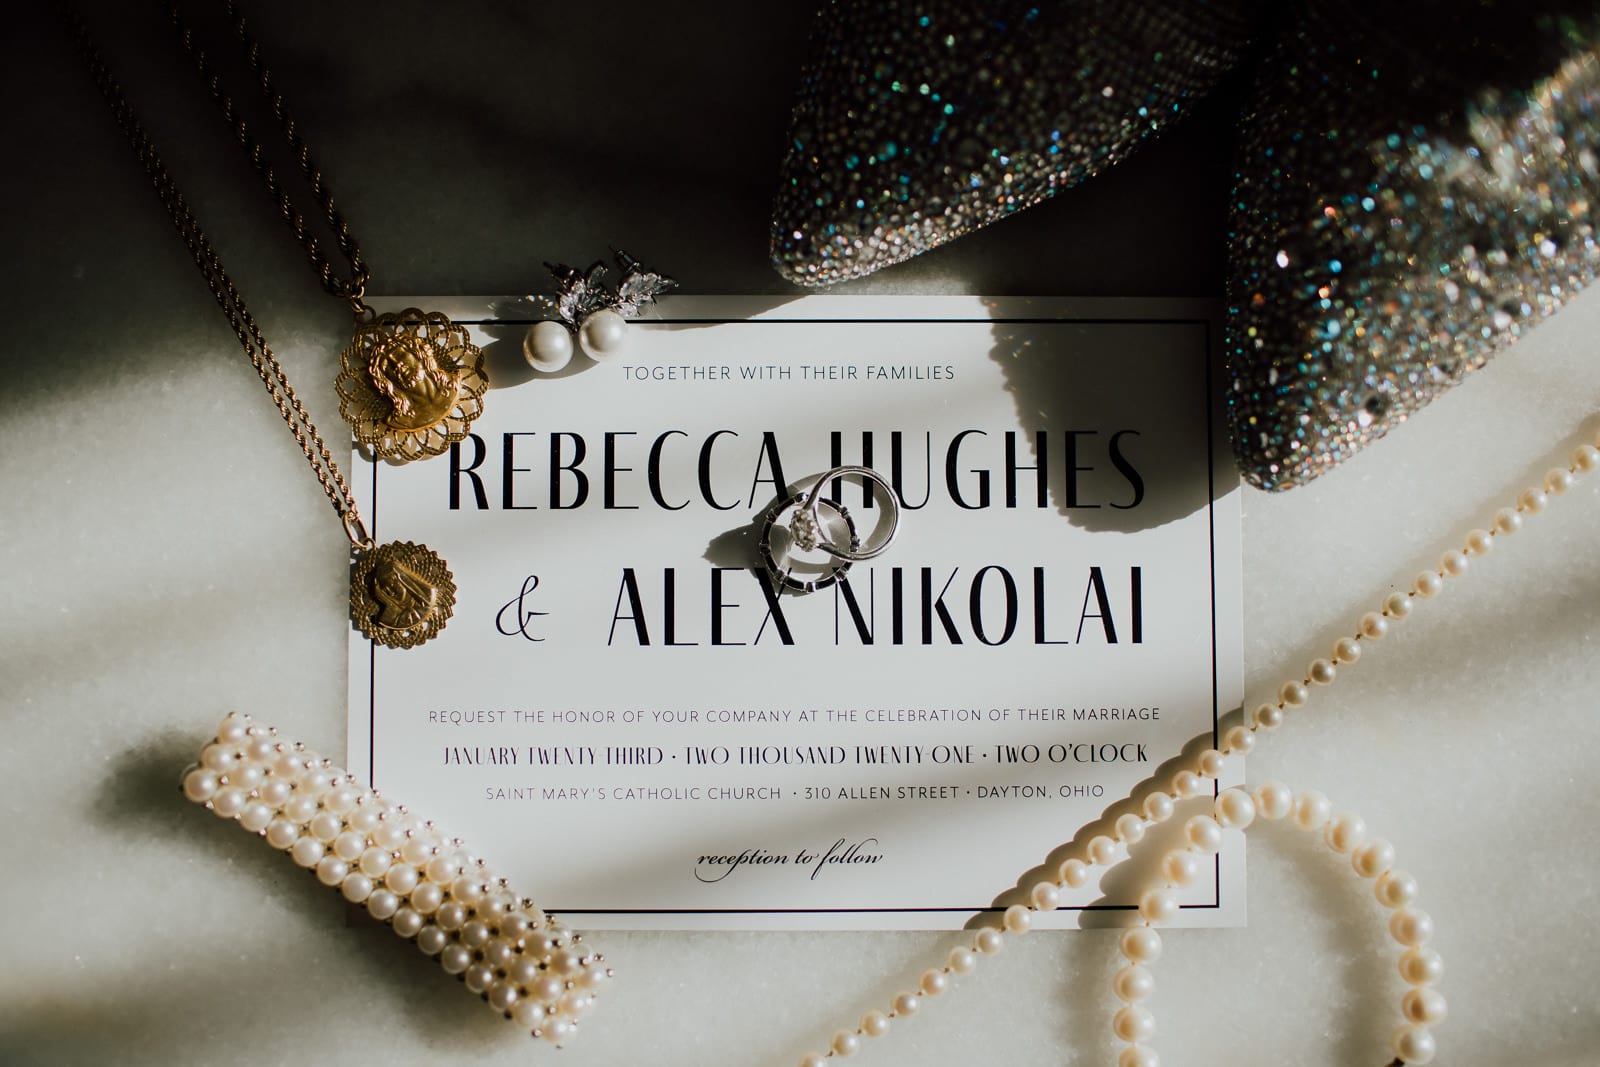 Details of pearl wedding jewelry and invitation